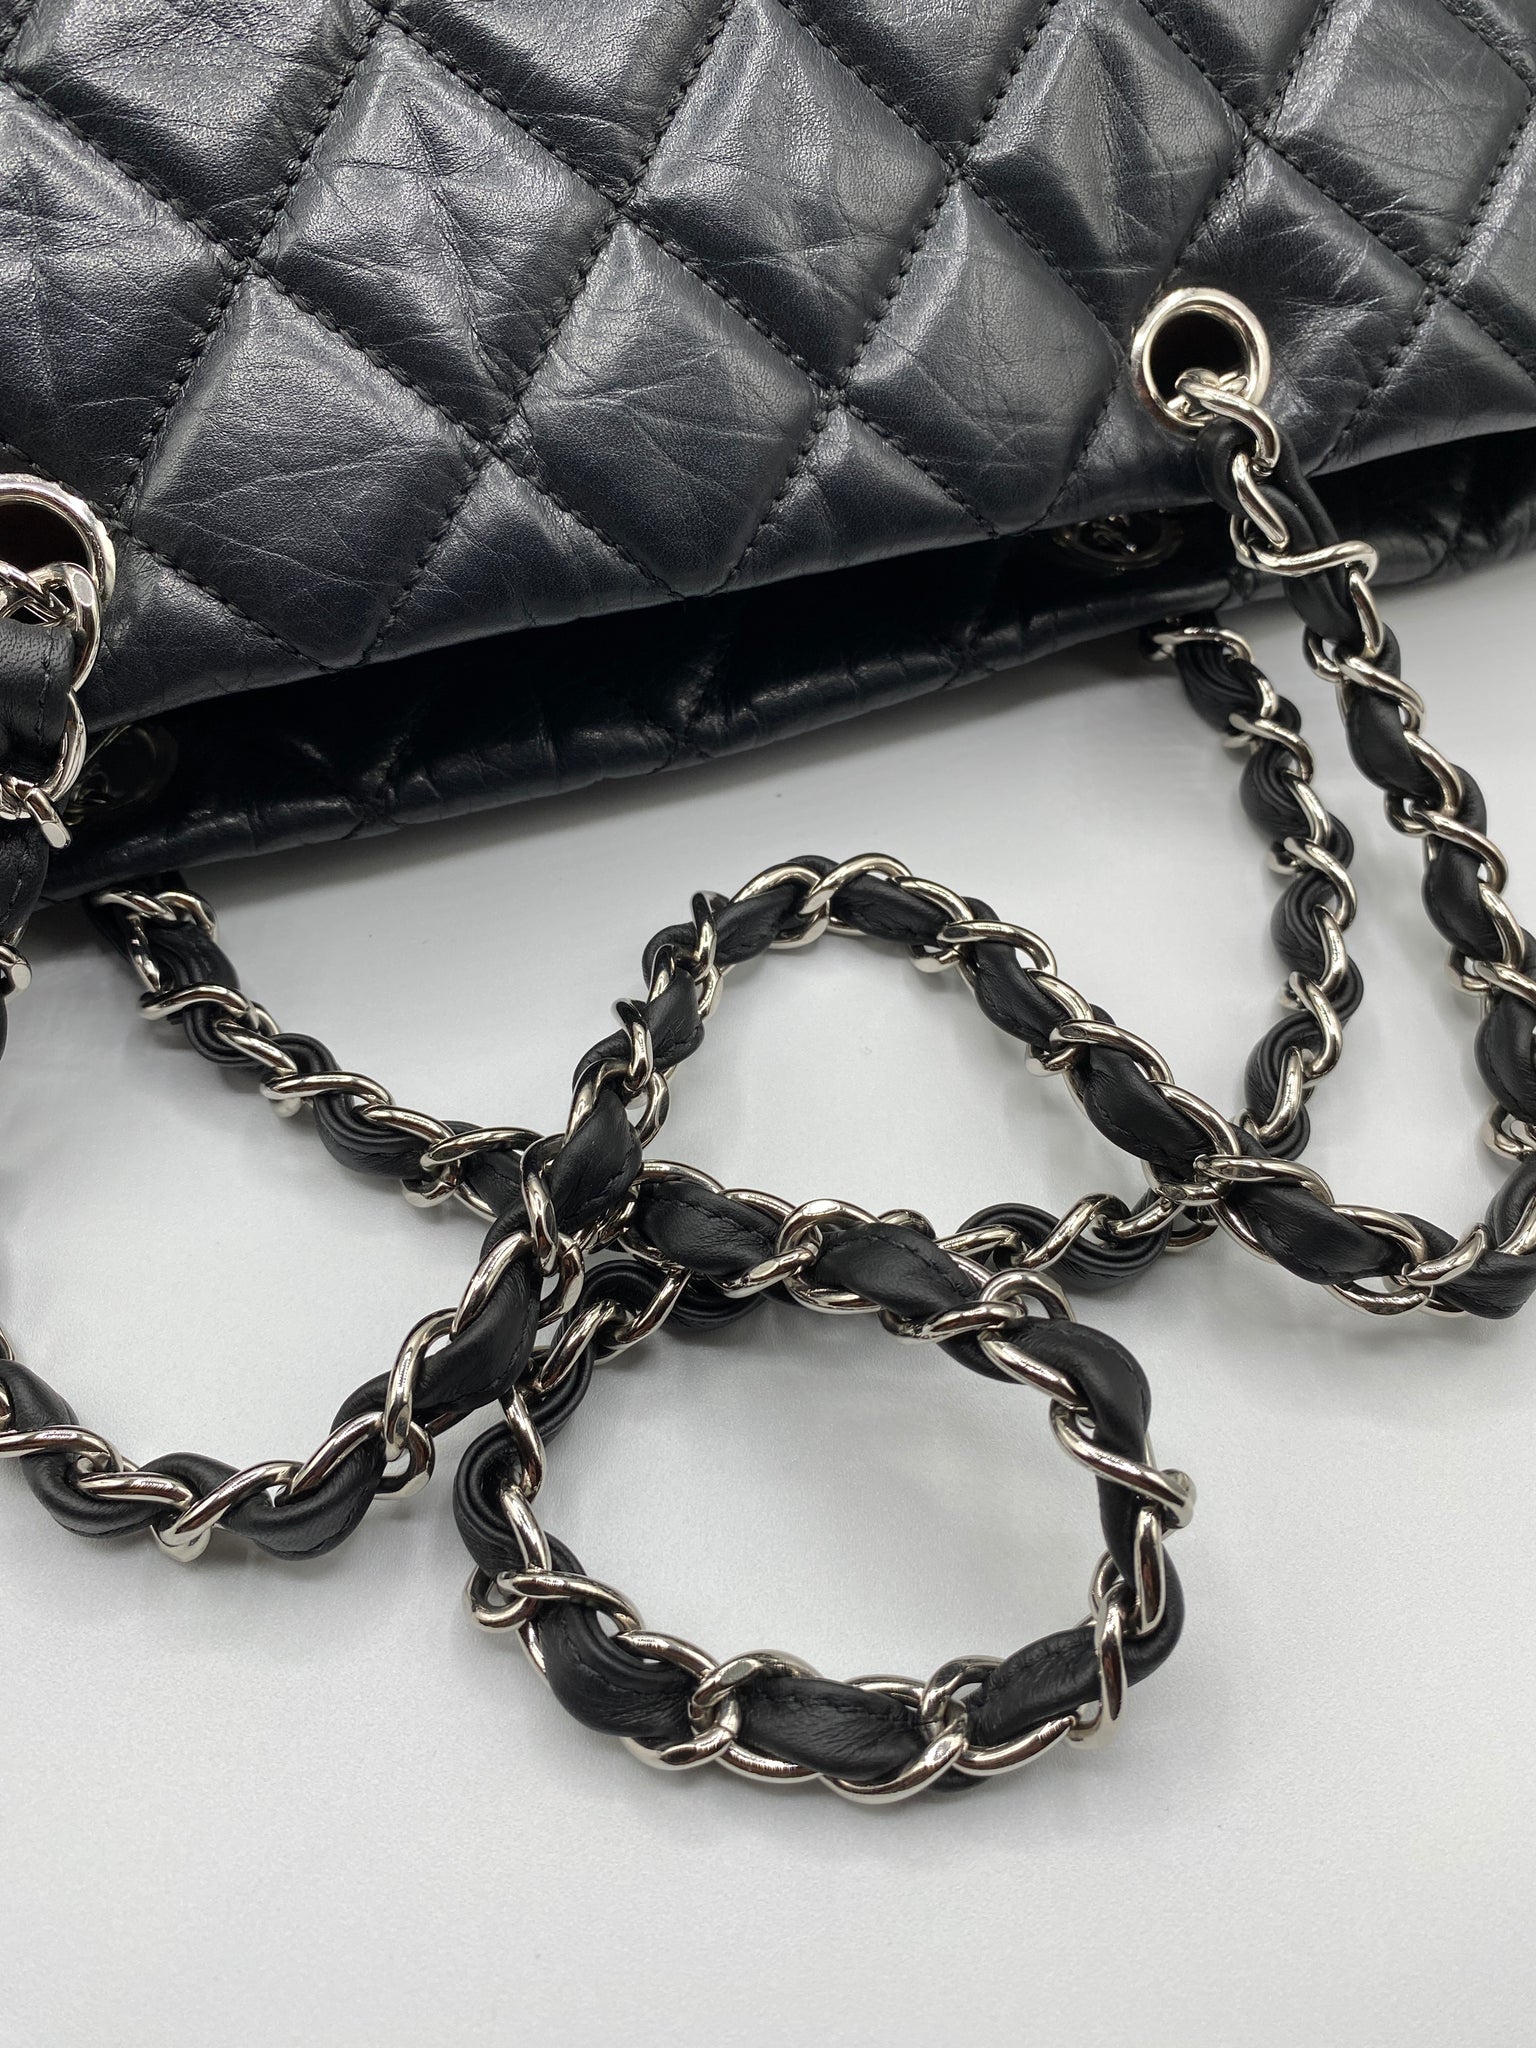 chanel shopping bag with chain